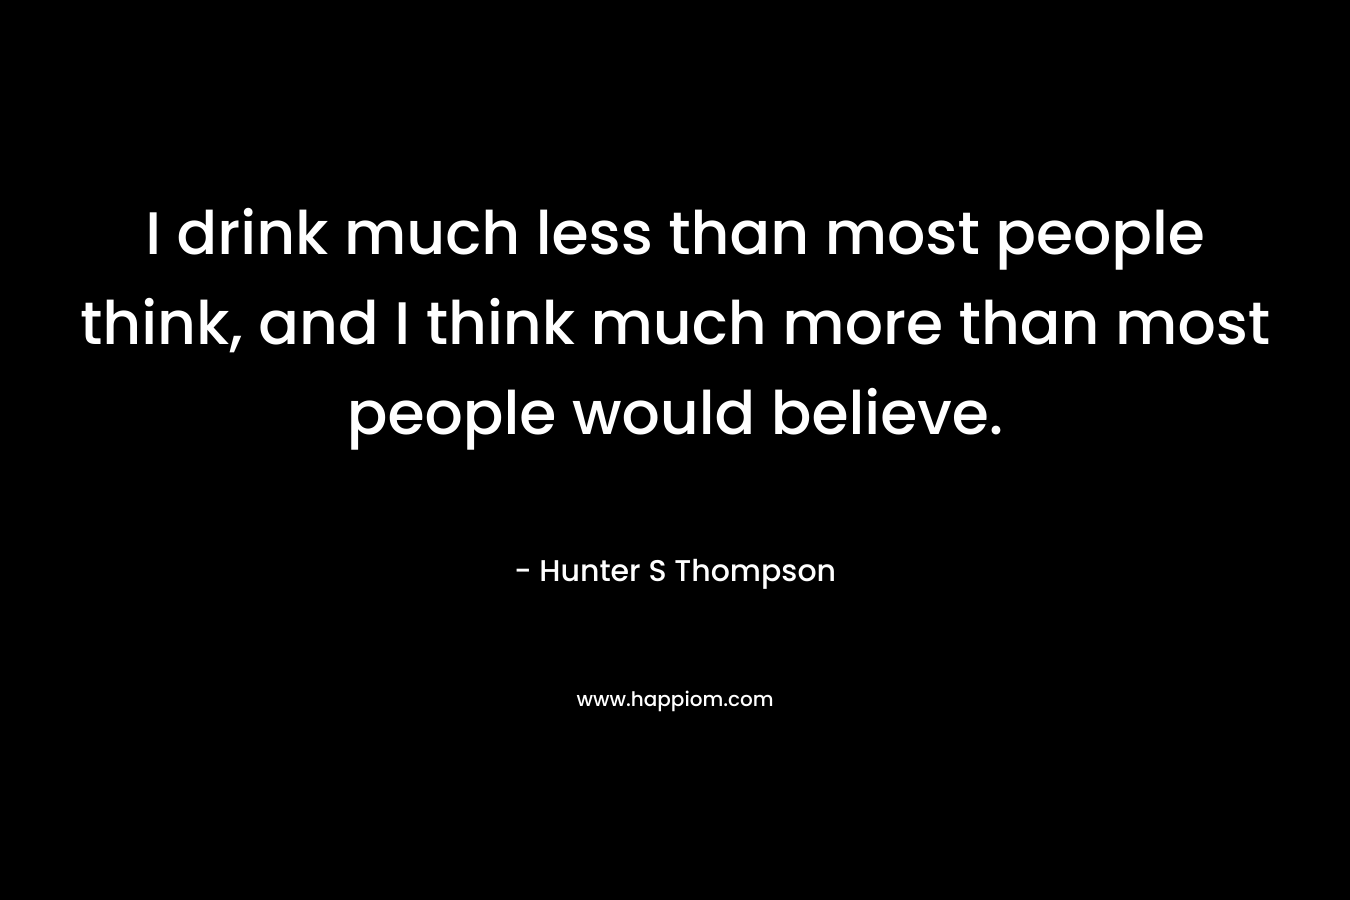 I drink much less than most people think, and I think much more than most people would believe.